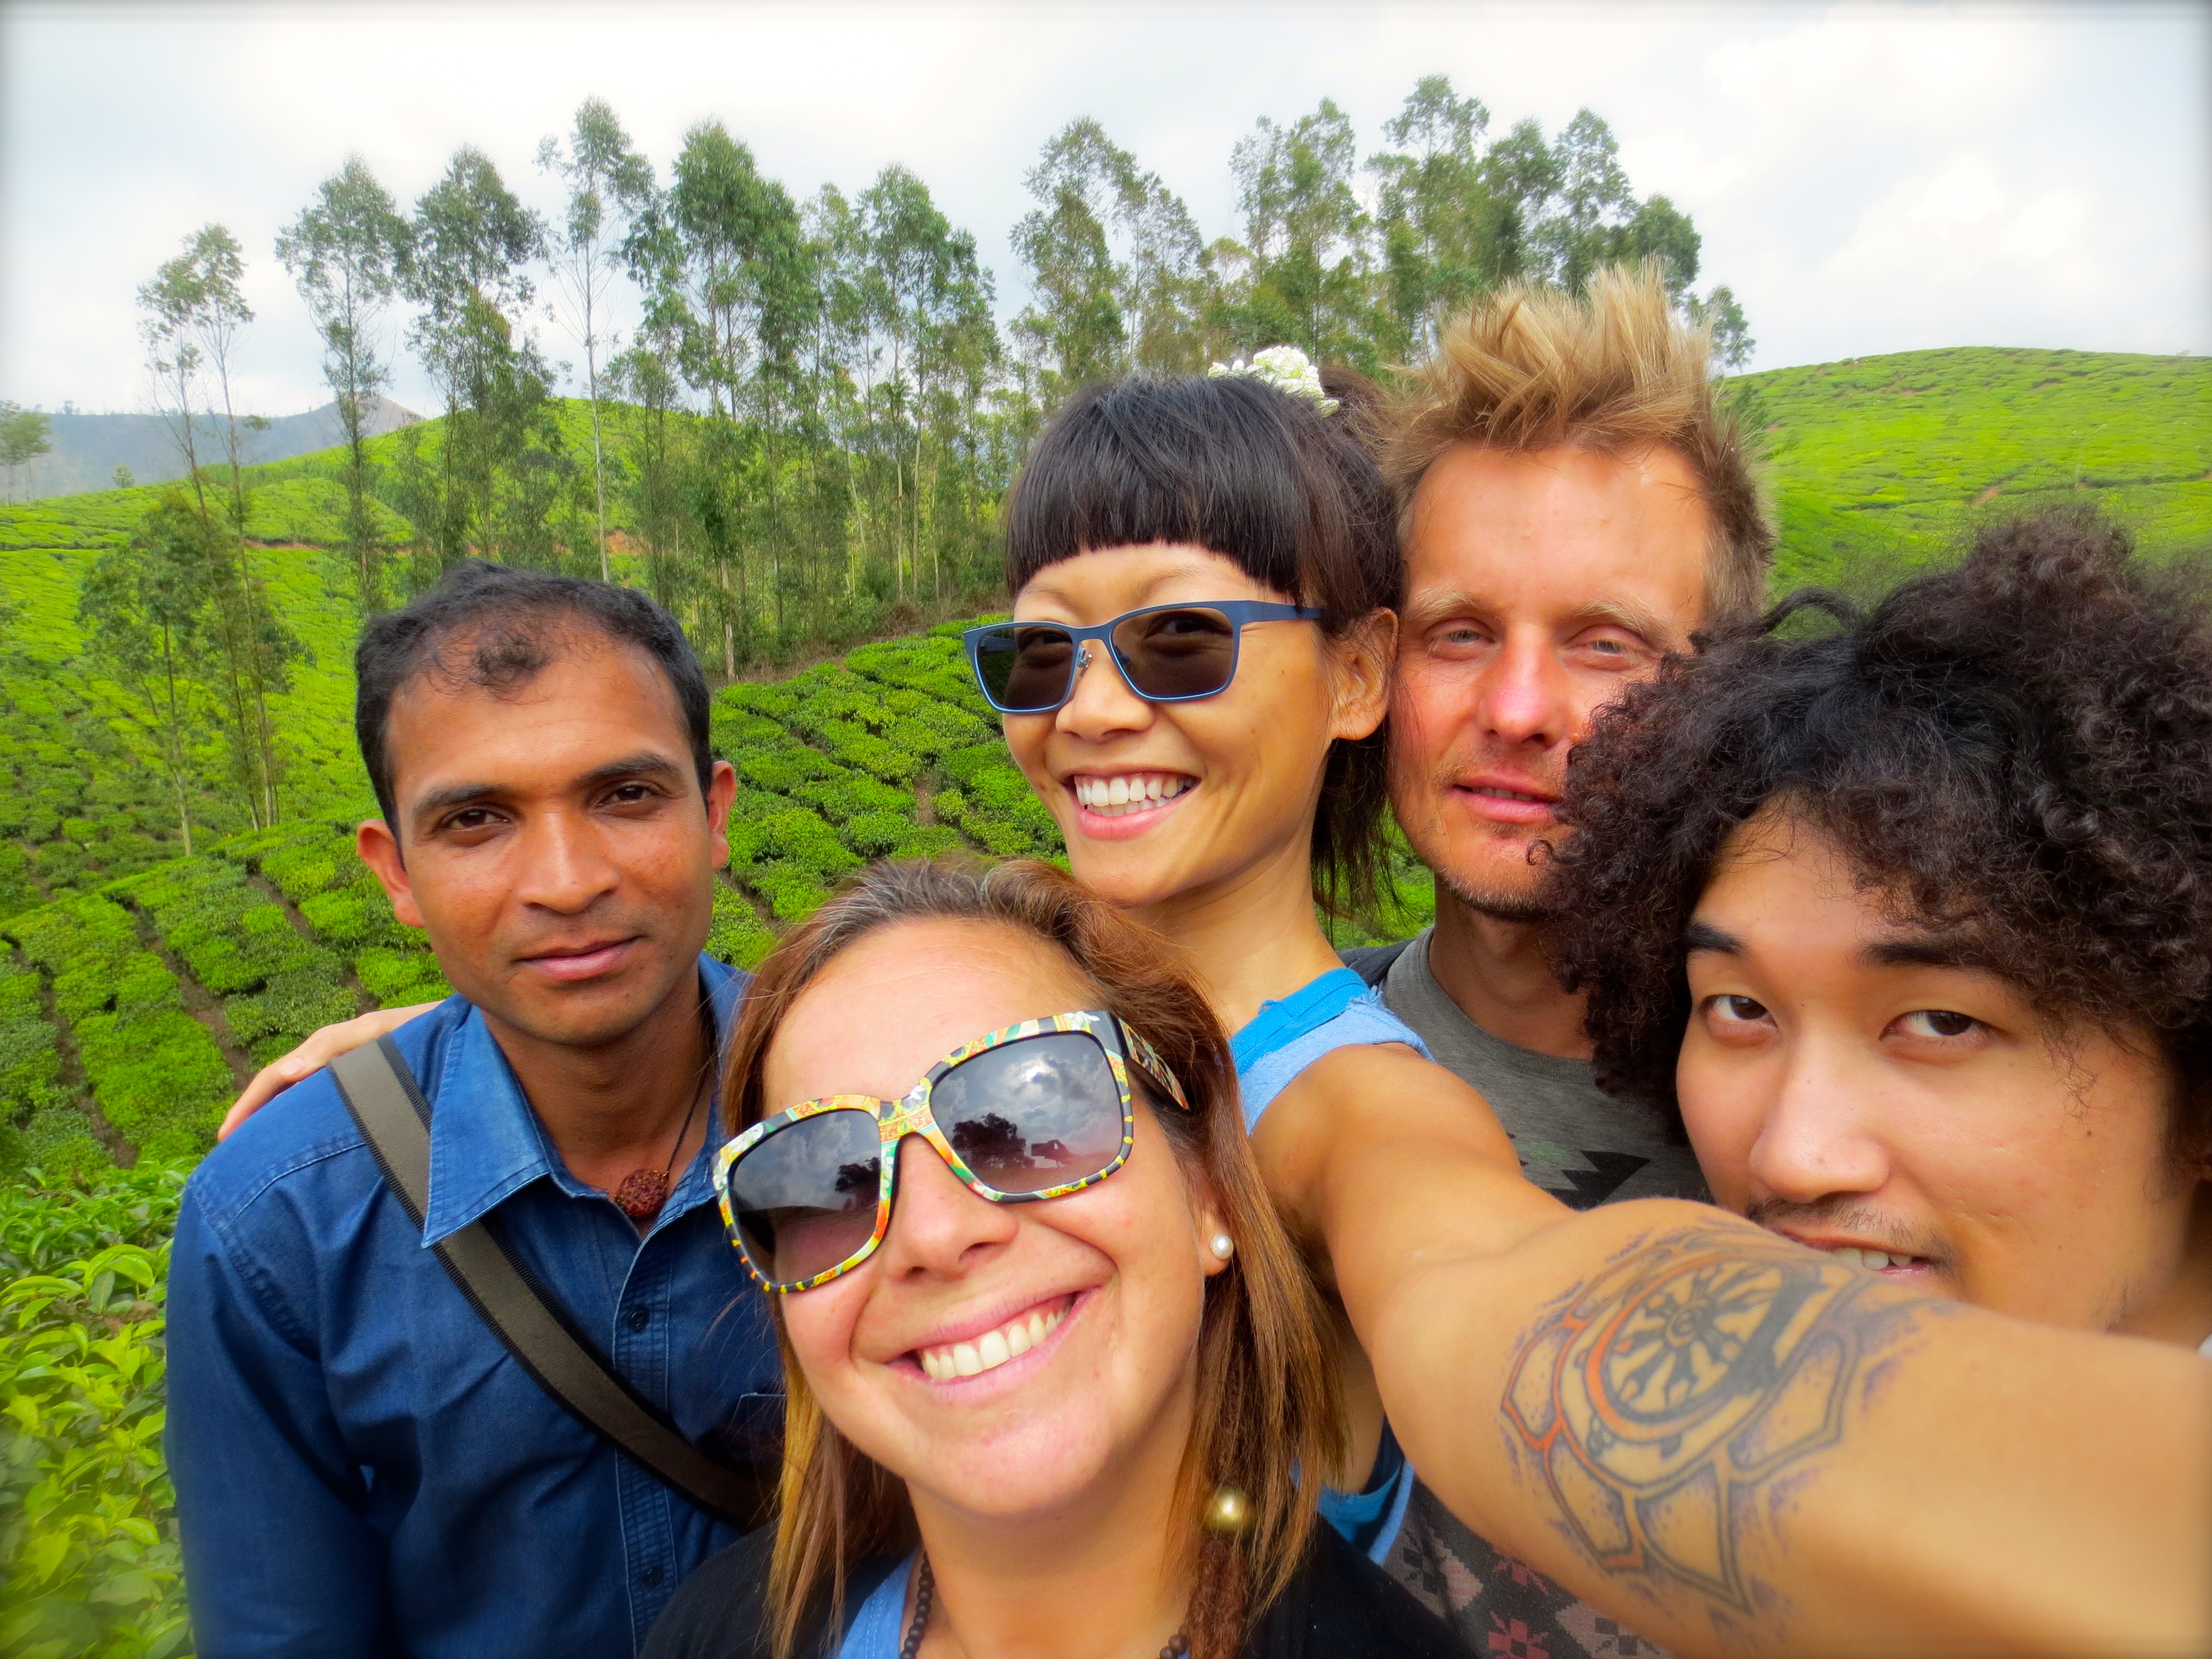 Budget travelers become fast friends, especially when we're trekking this big world alone. To experience the magic that day with new friends was a dream come true in many ways, and I believe each of us walked away with more love in our hearts that day. Munnar Hill Station, Kerala